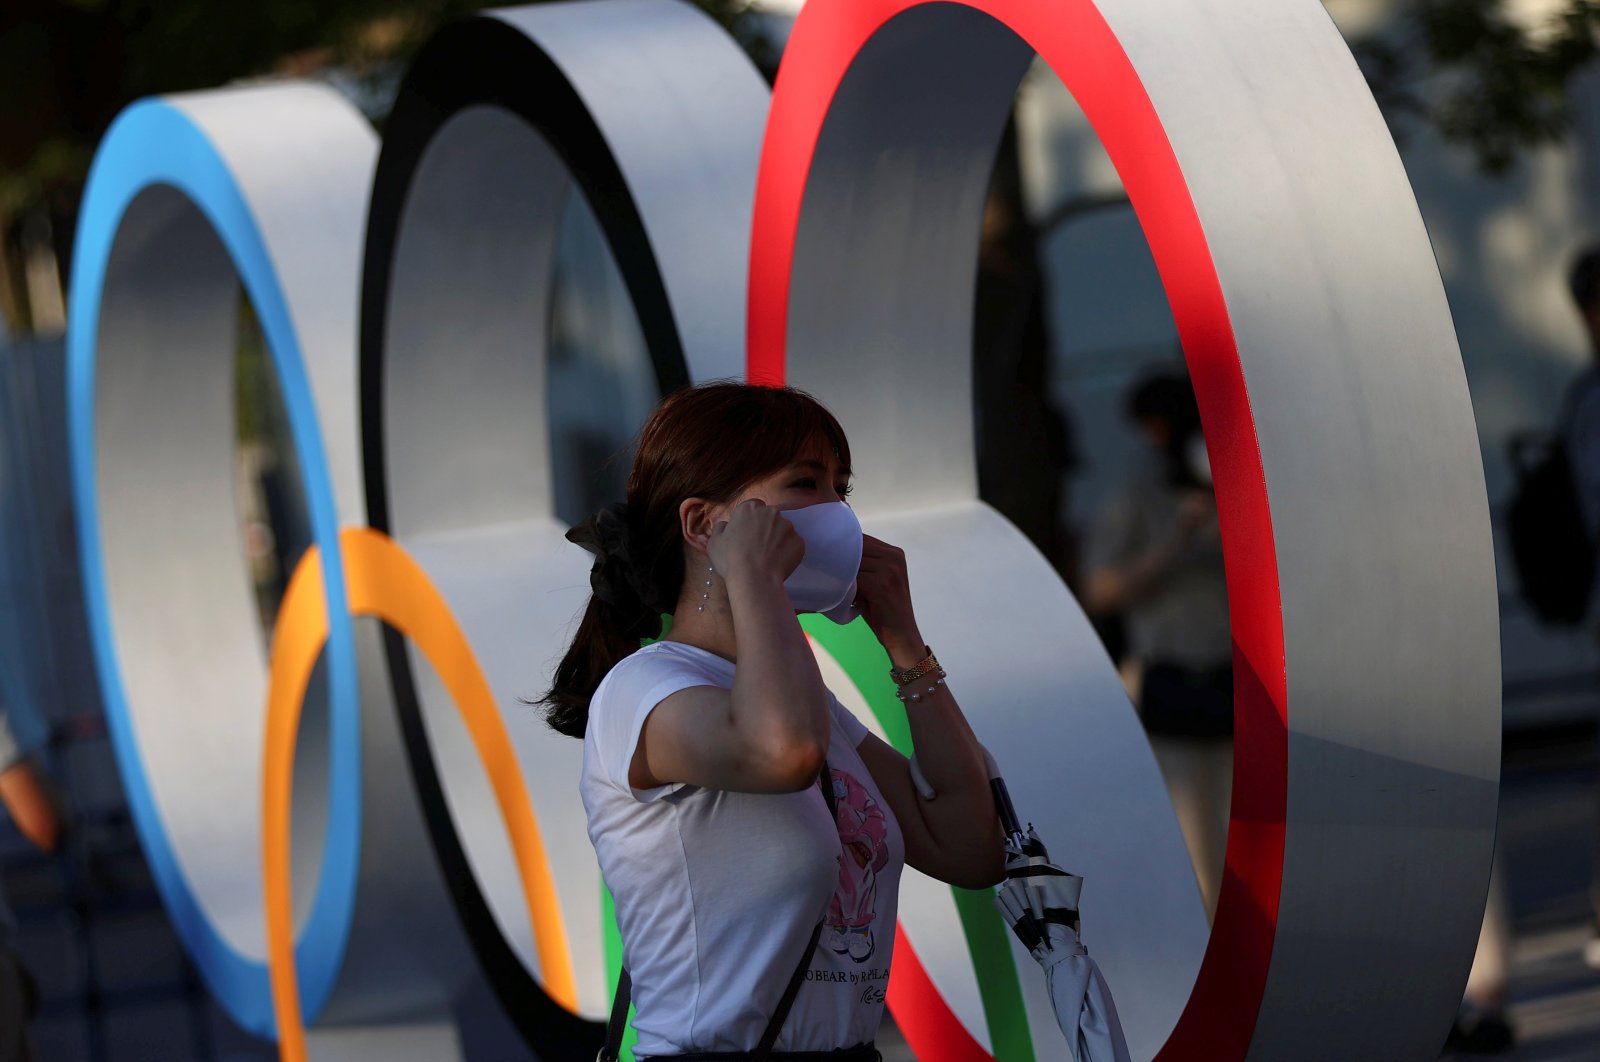 A woman adjusts her protective mask next to an Olympic rings monument outside the National Stadium, the main venue for the Tokyo 2020 Olympics amid the COVID-19 pandemic, Tokyo, Japan, July 31, 2021. (Reuters Photo)